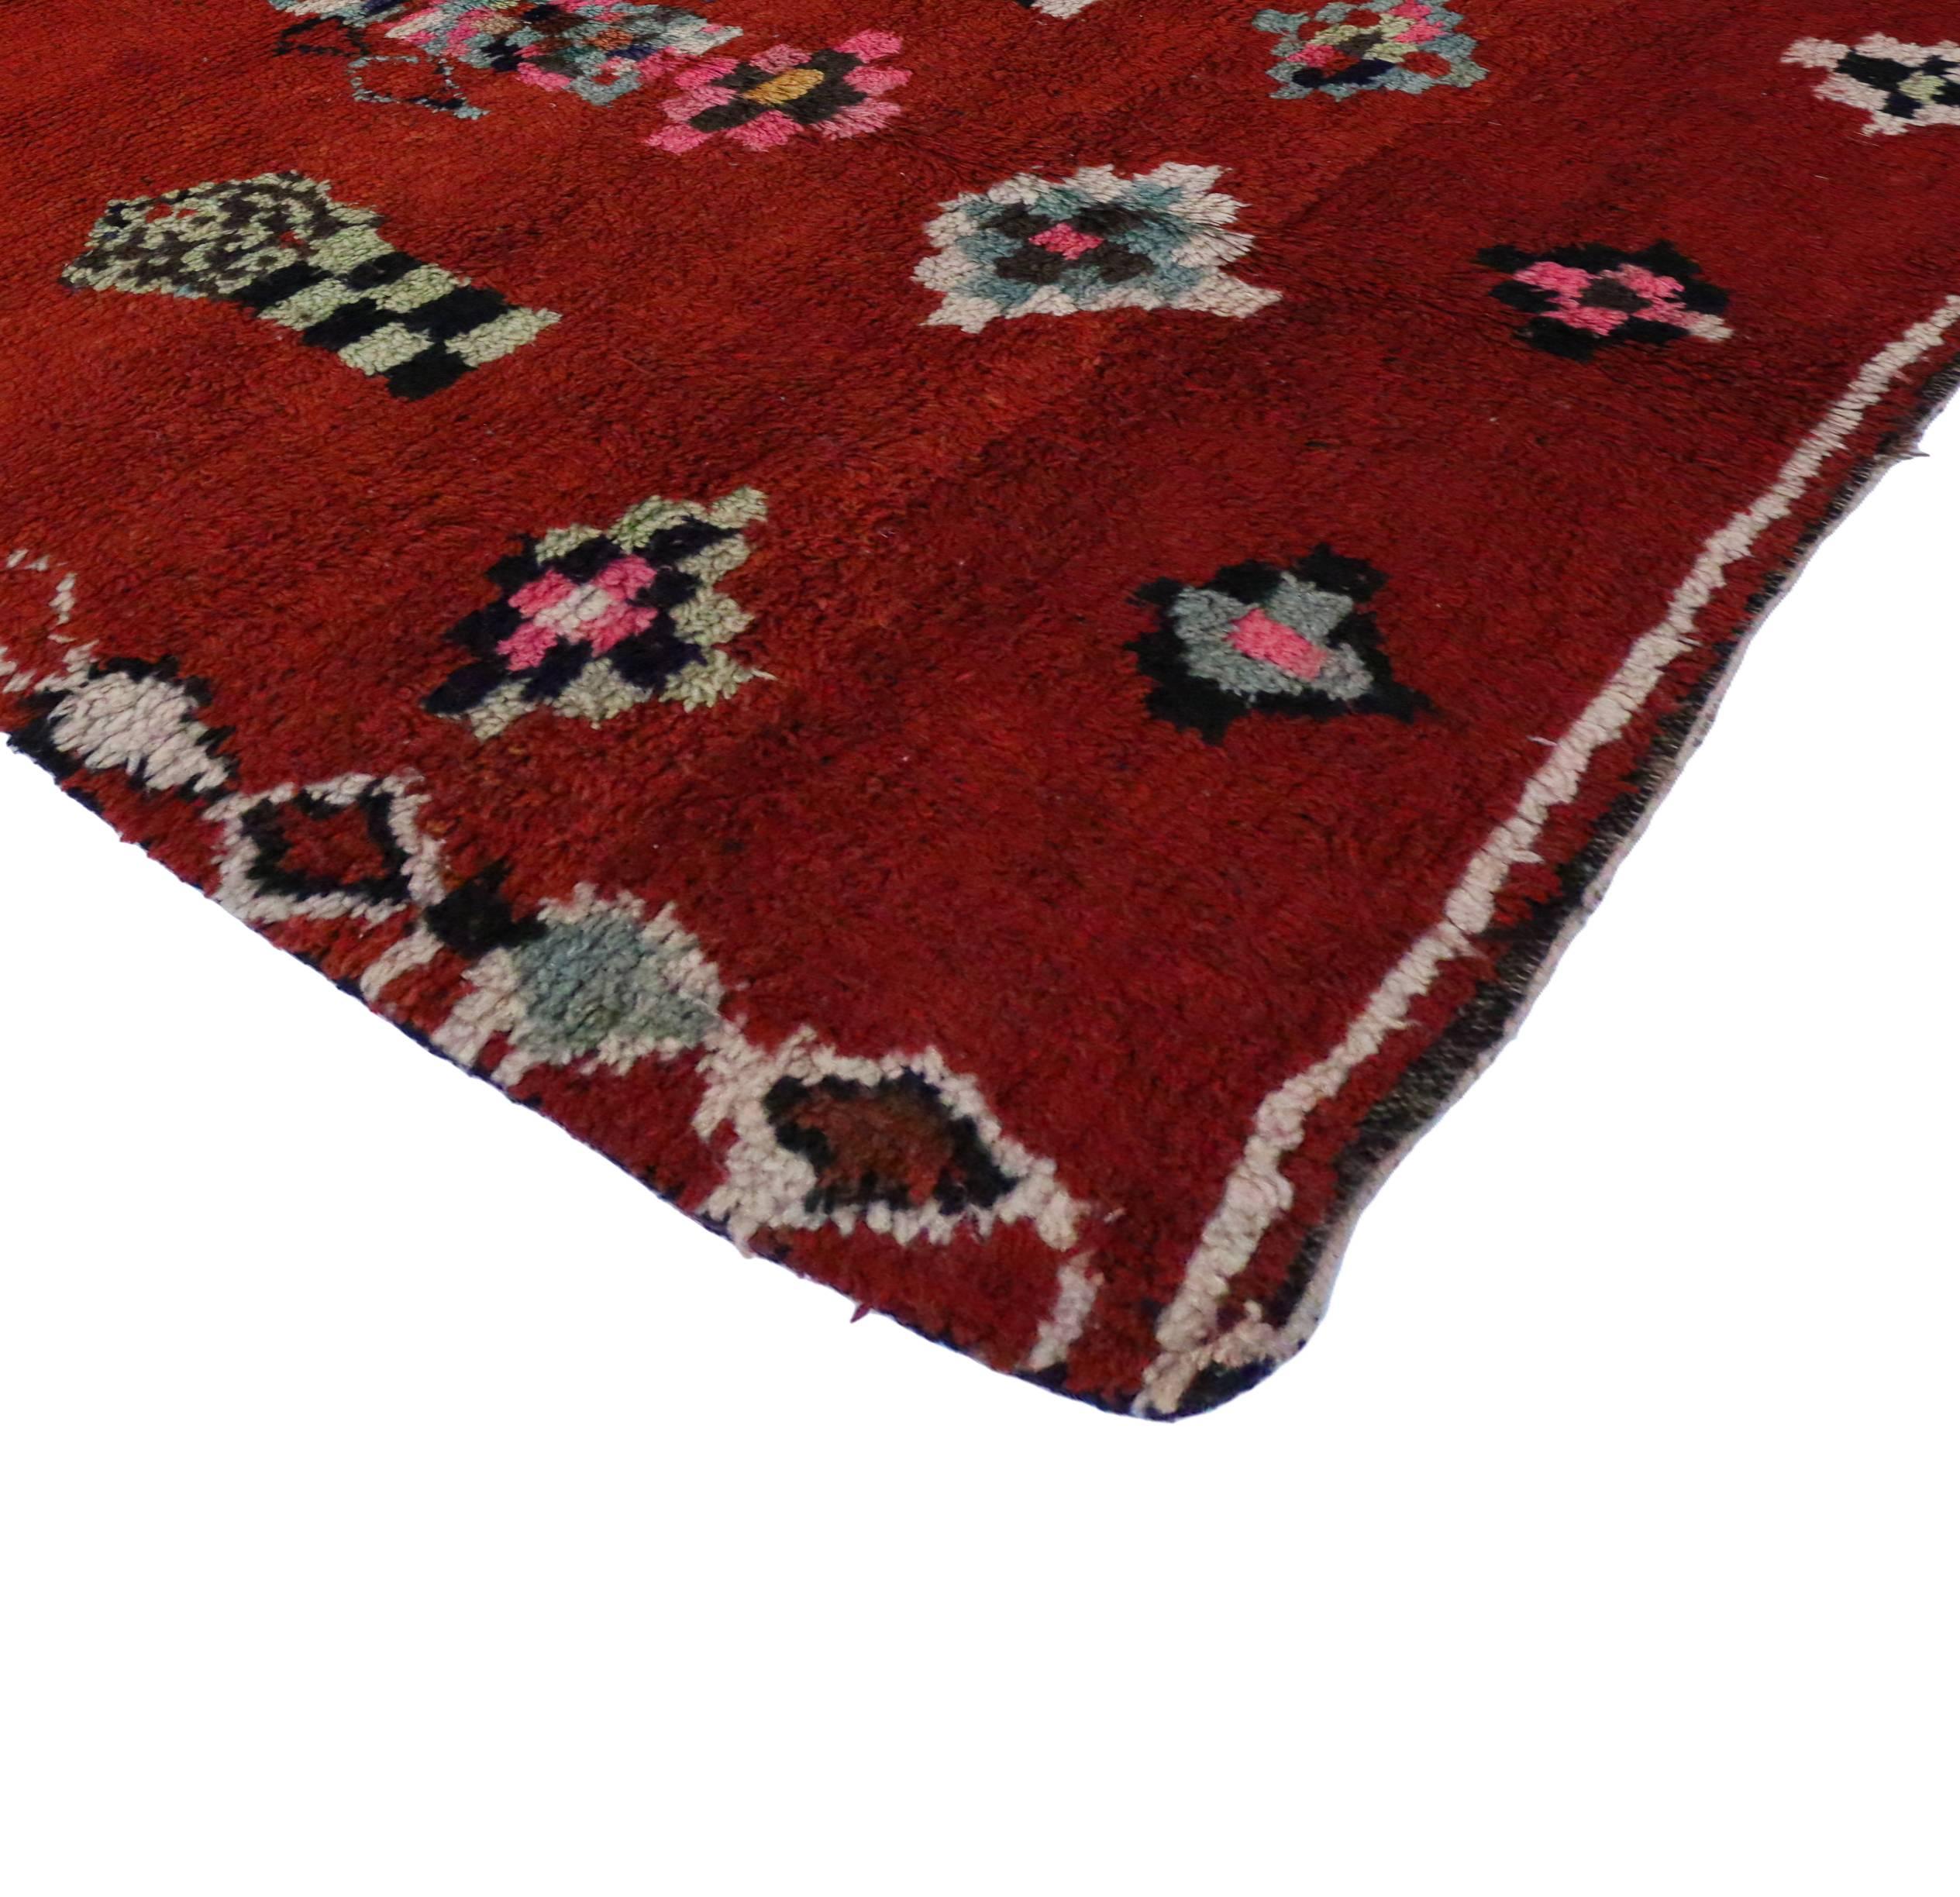 Hand-Knotted Boho Chic Berber Moroccan Rug with Contemporary Abstract Design